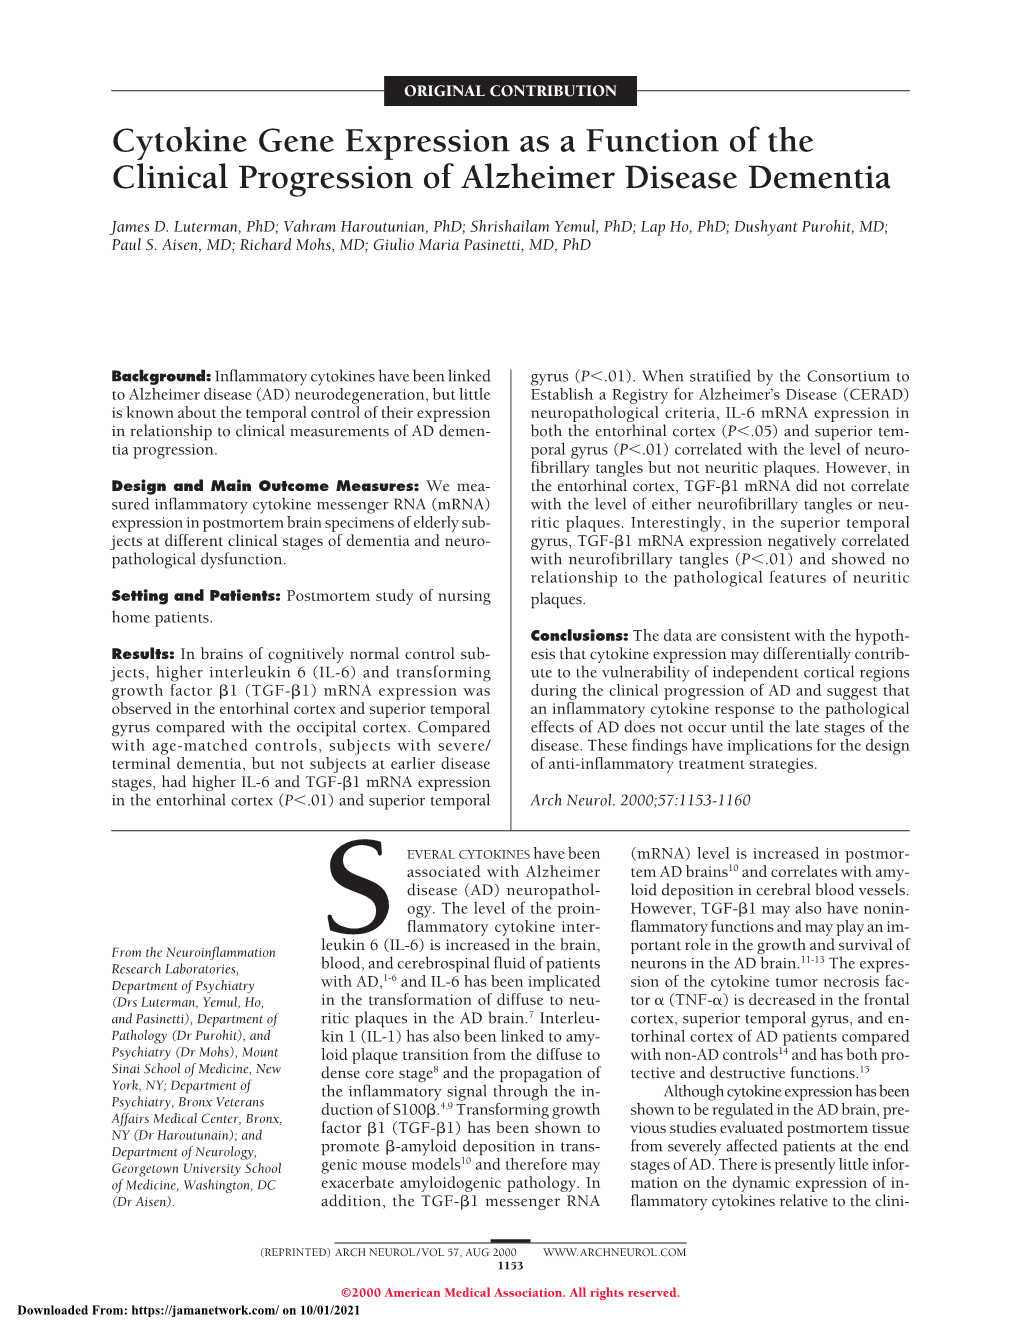 Cytokine Gene Expression As a Function of the Clinical Progression of Alzheimer Disease Dementia